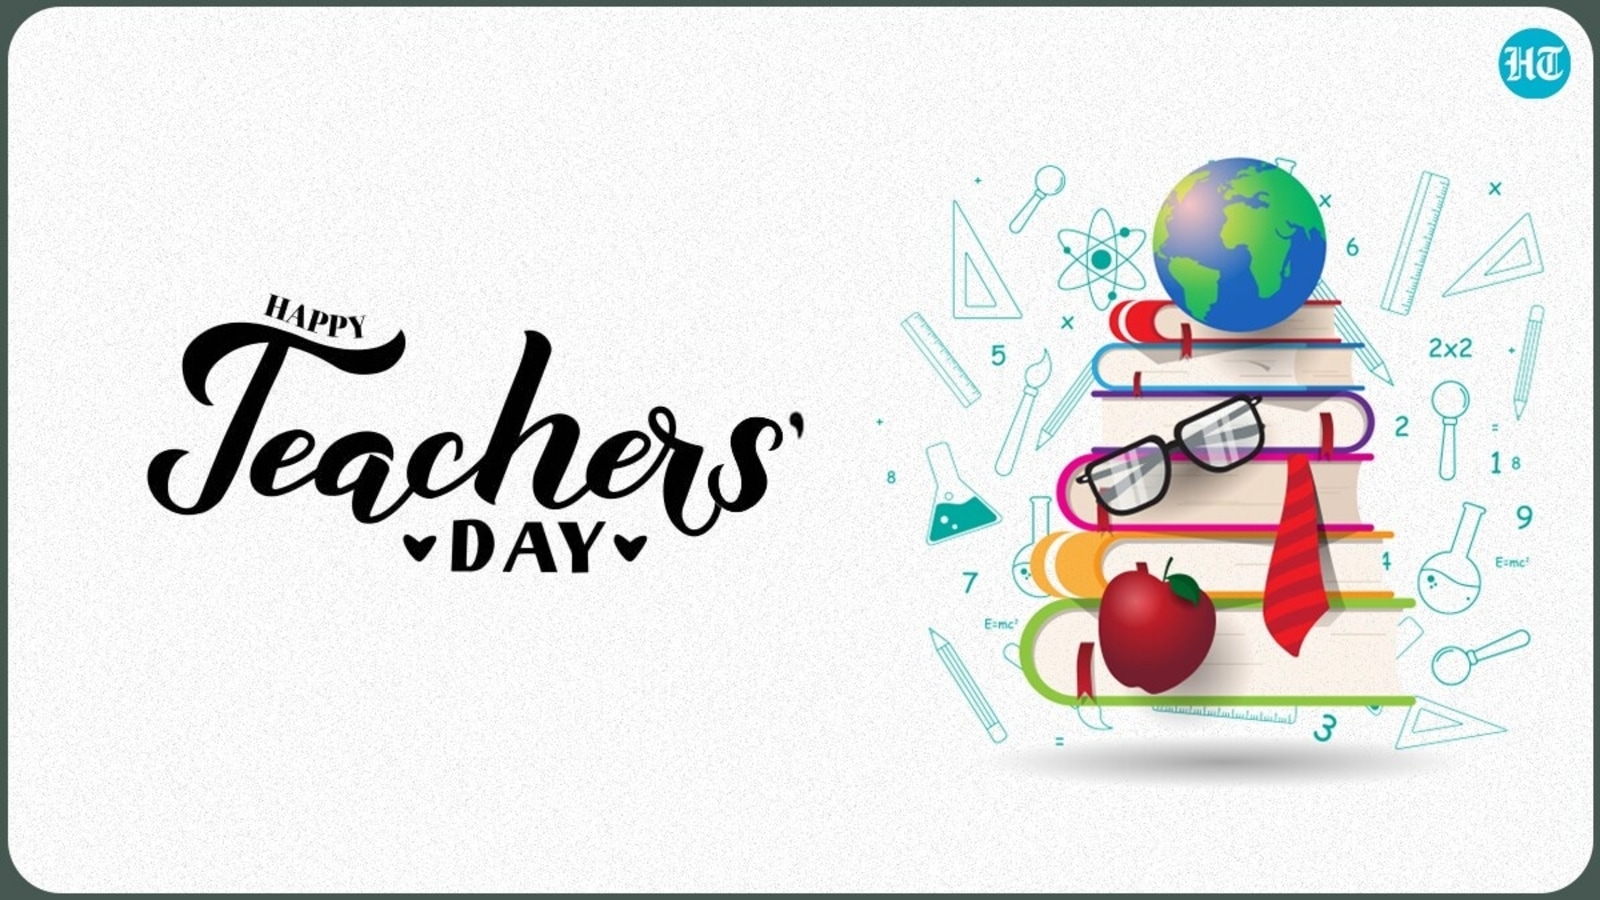 Happy Teachers' Day: Wishes, quotes, images, messages to celebrate your  teacher - Hindustan Times